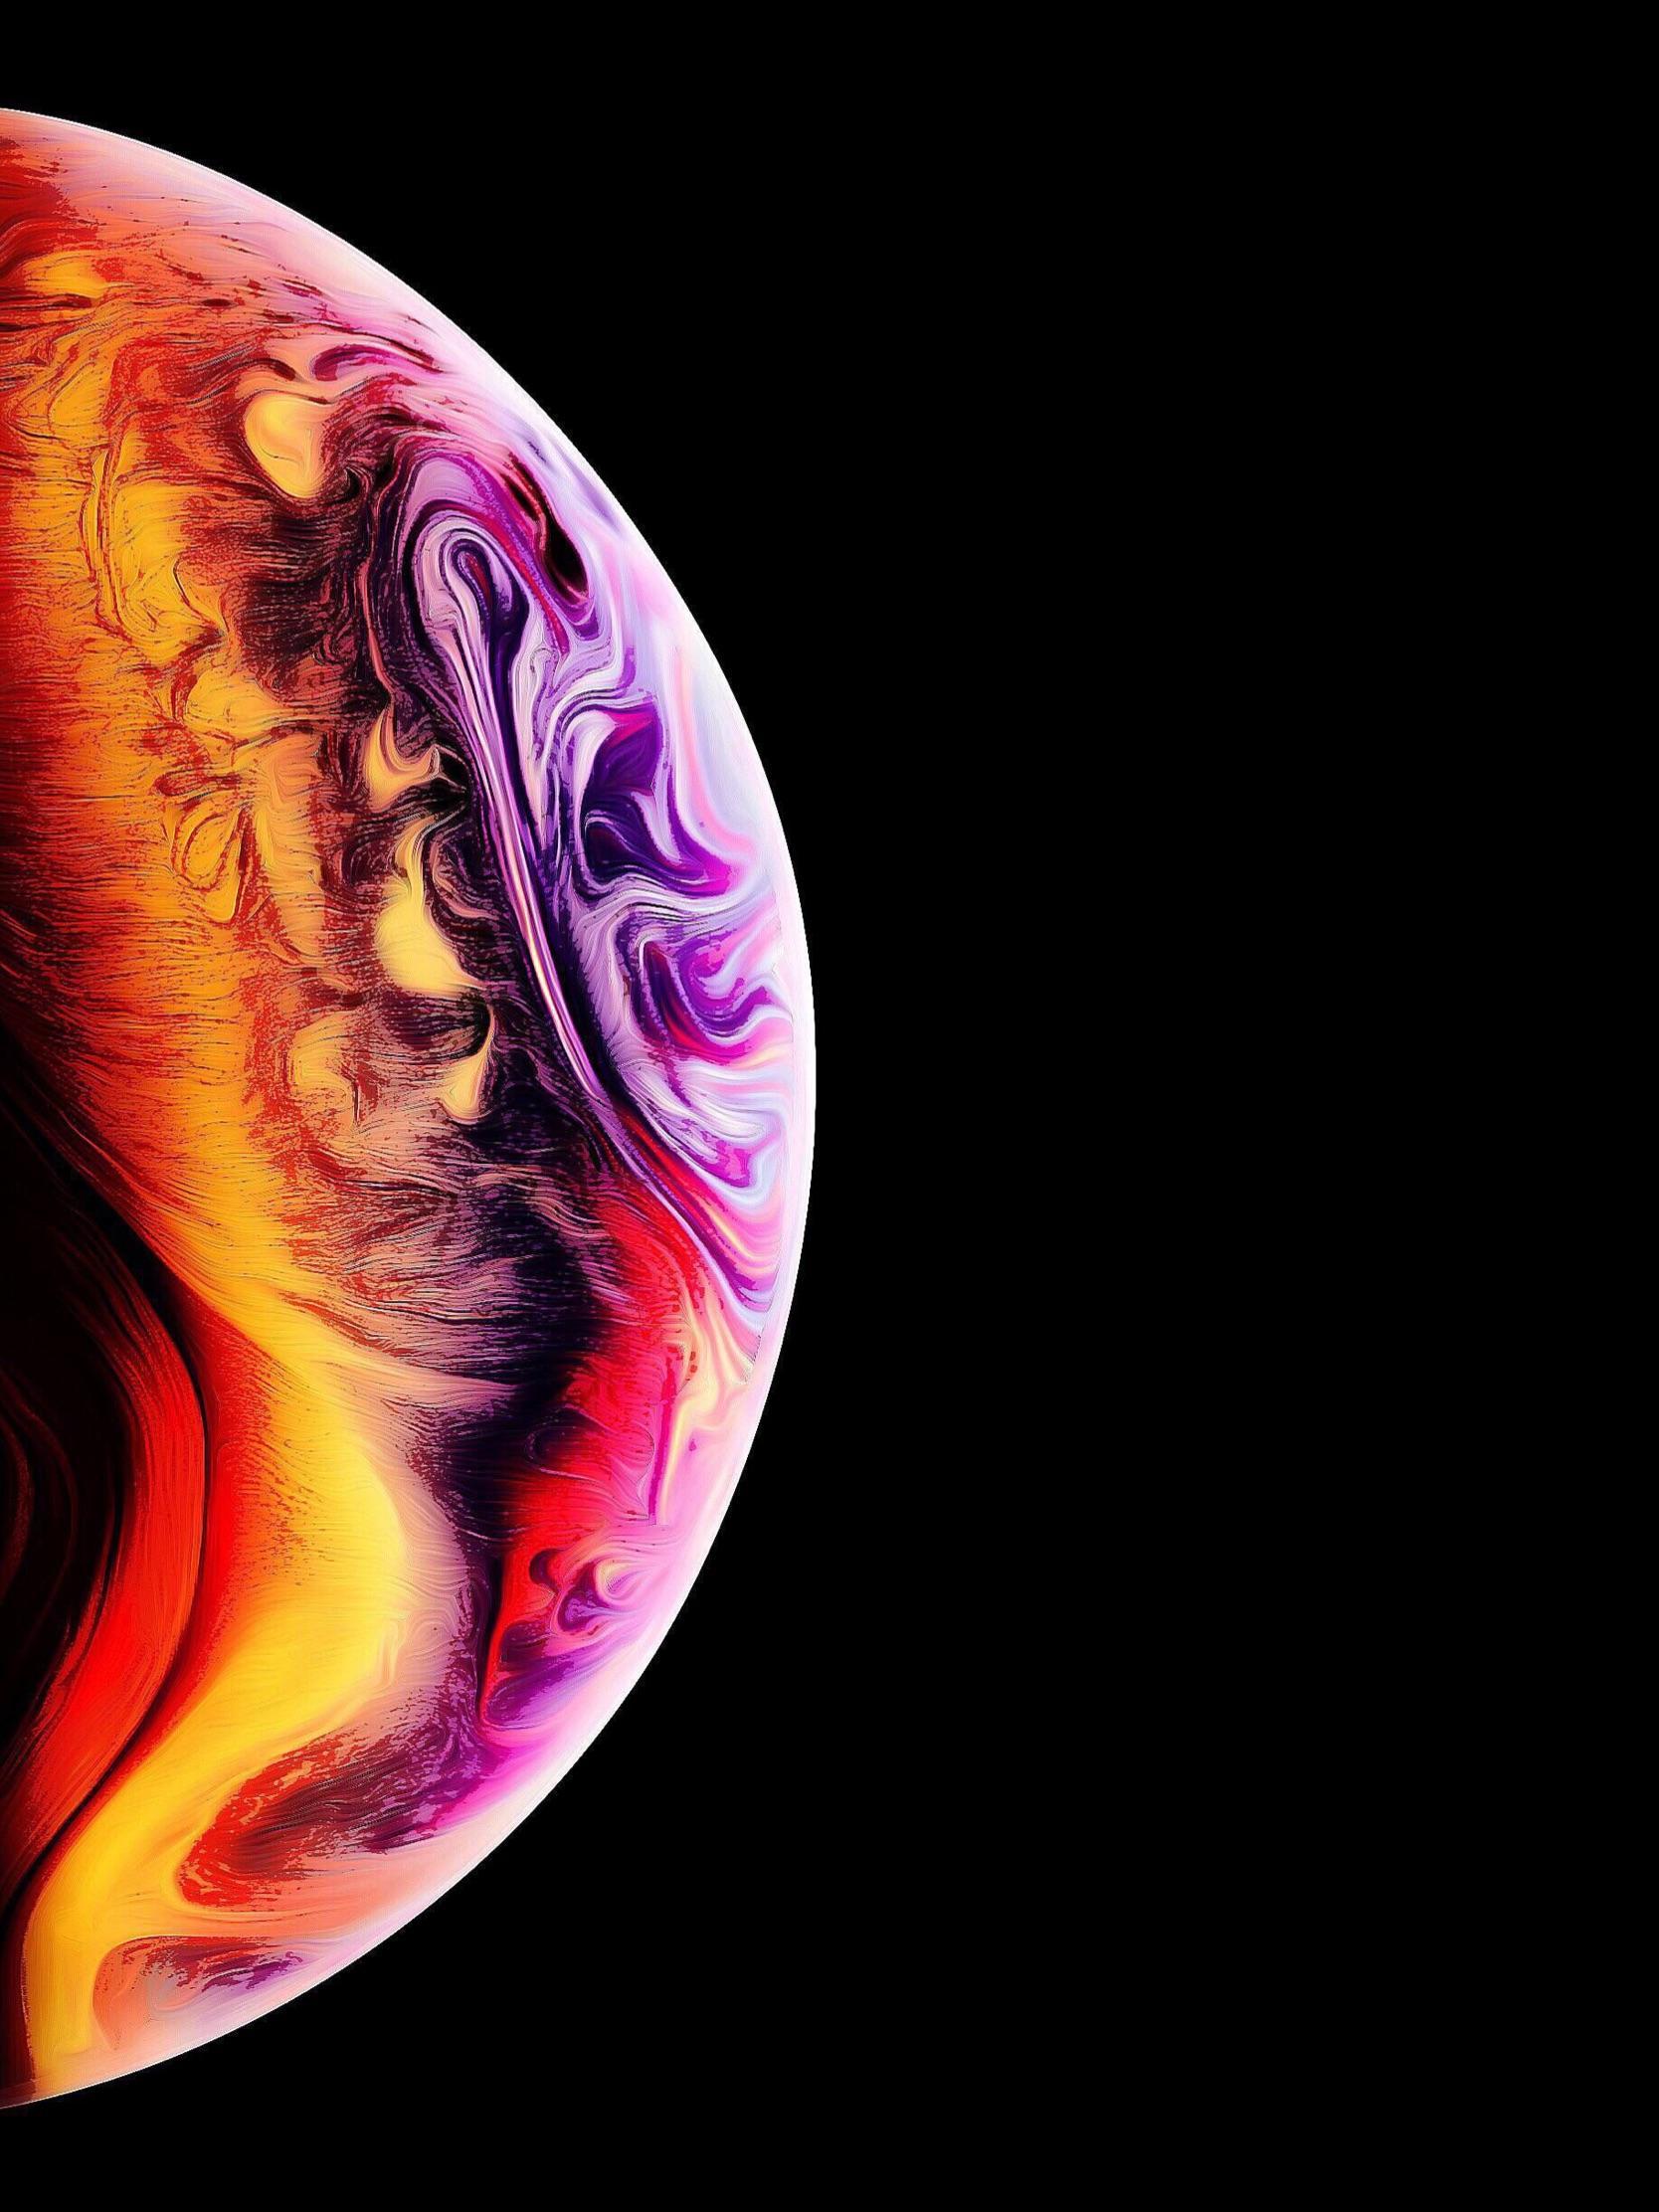 Hd iPhone Xs Wallpapers - Wallpaper Cave